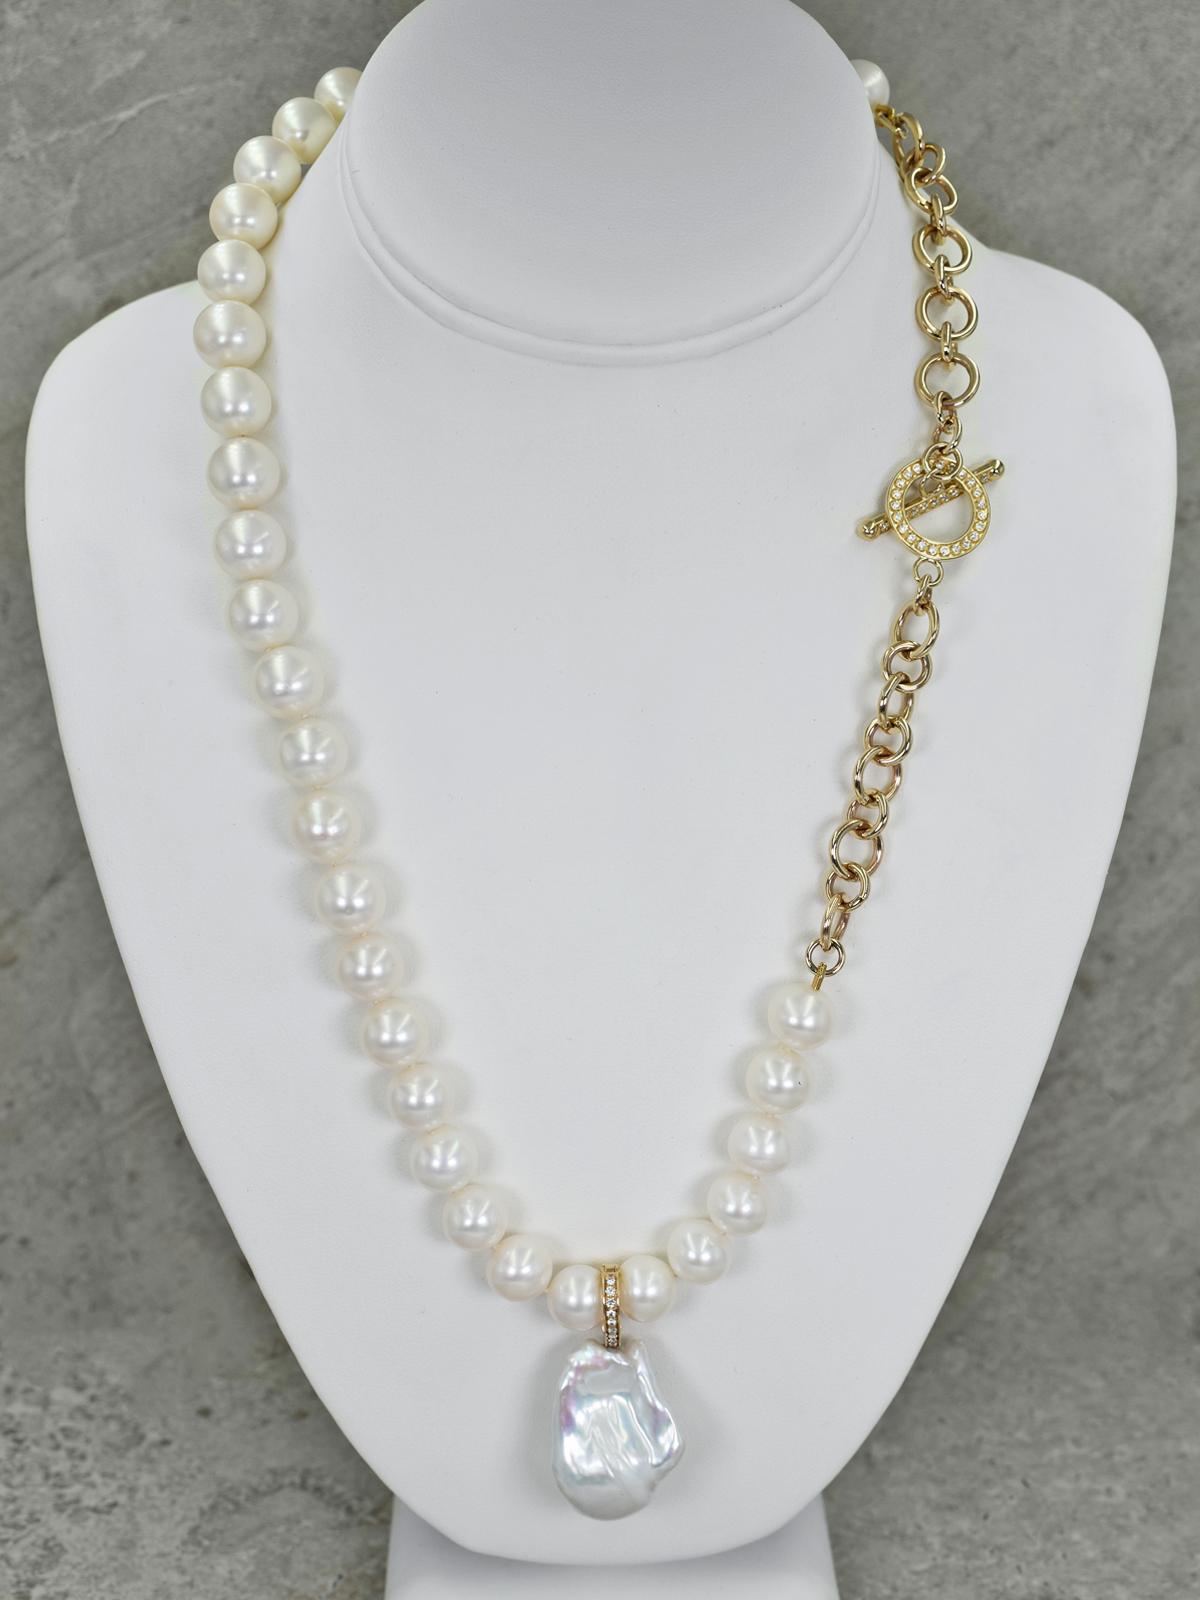 pearl necklace with diamond pendant